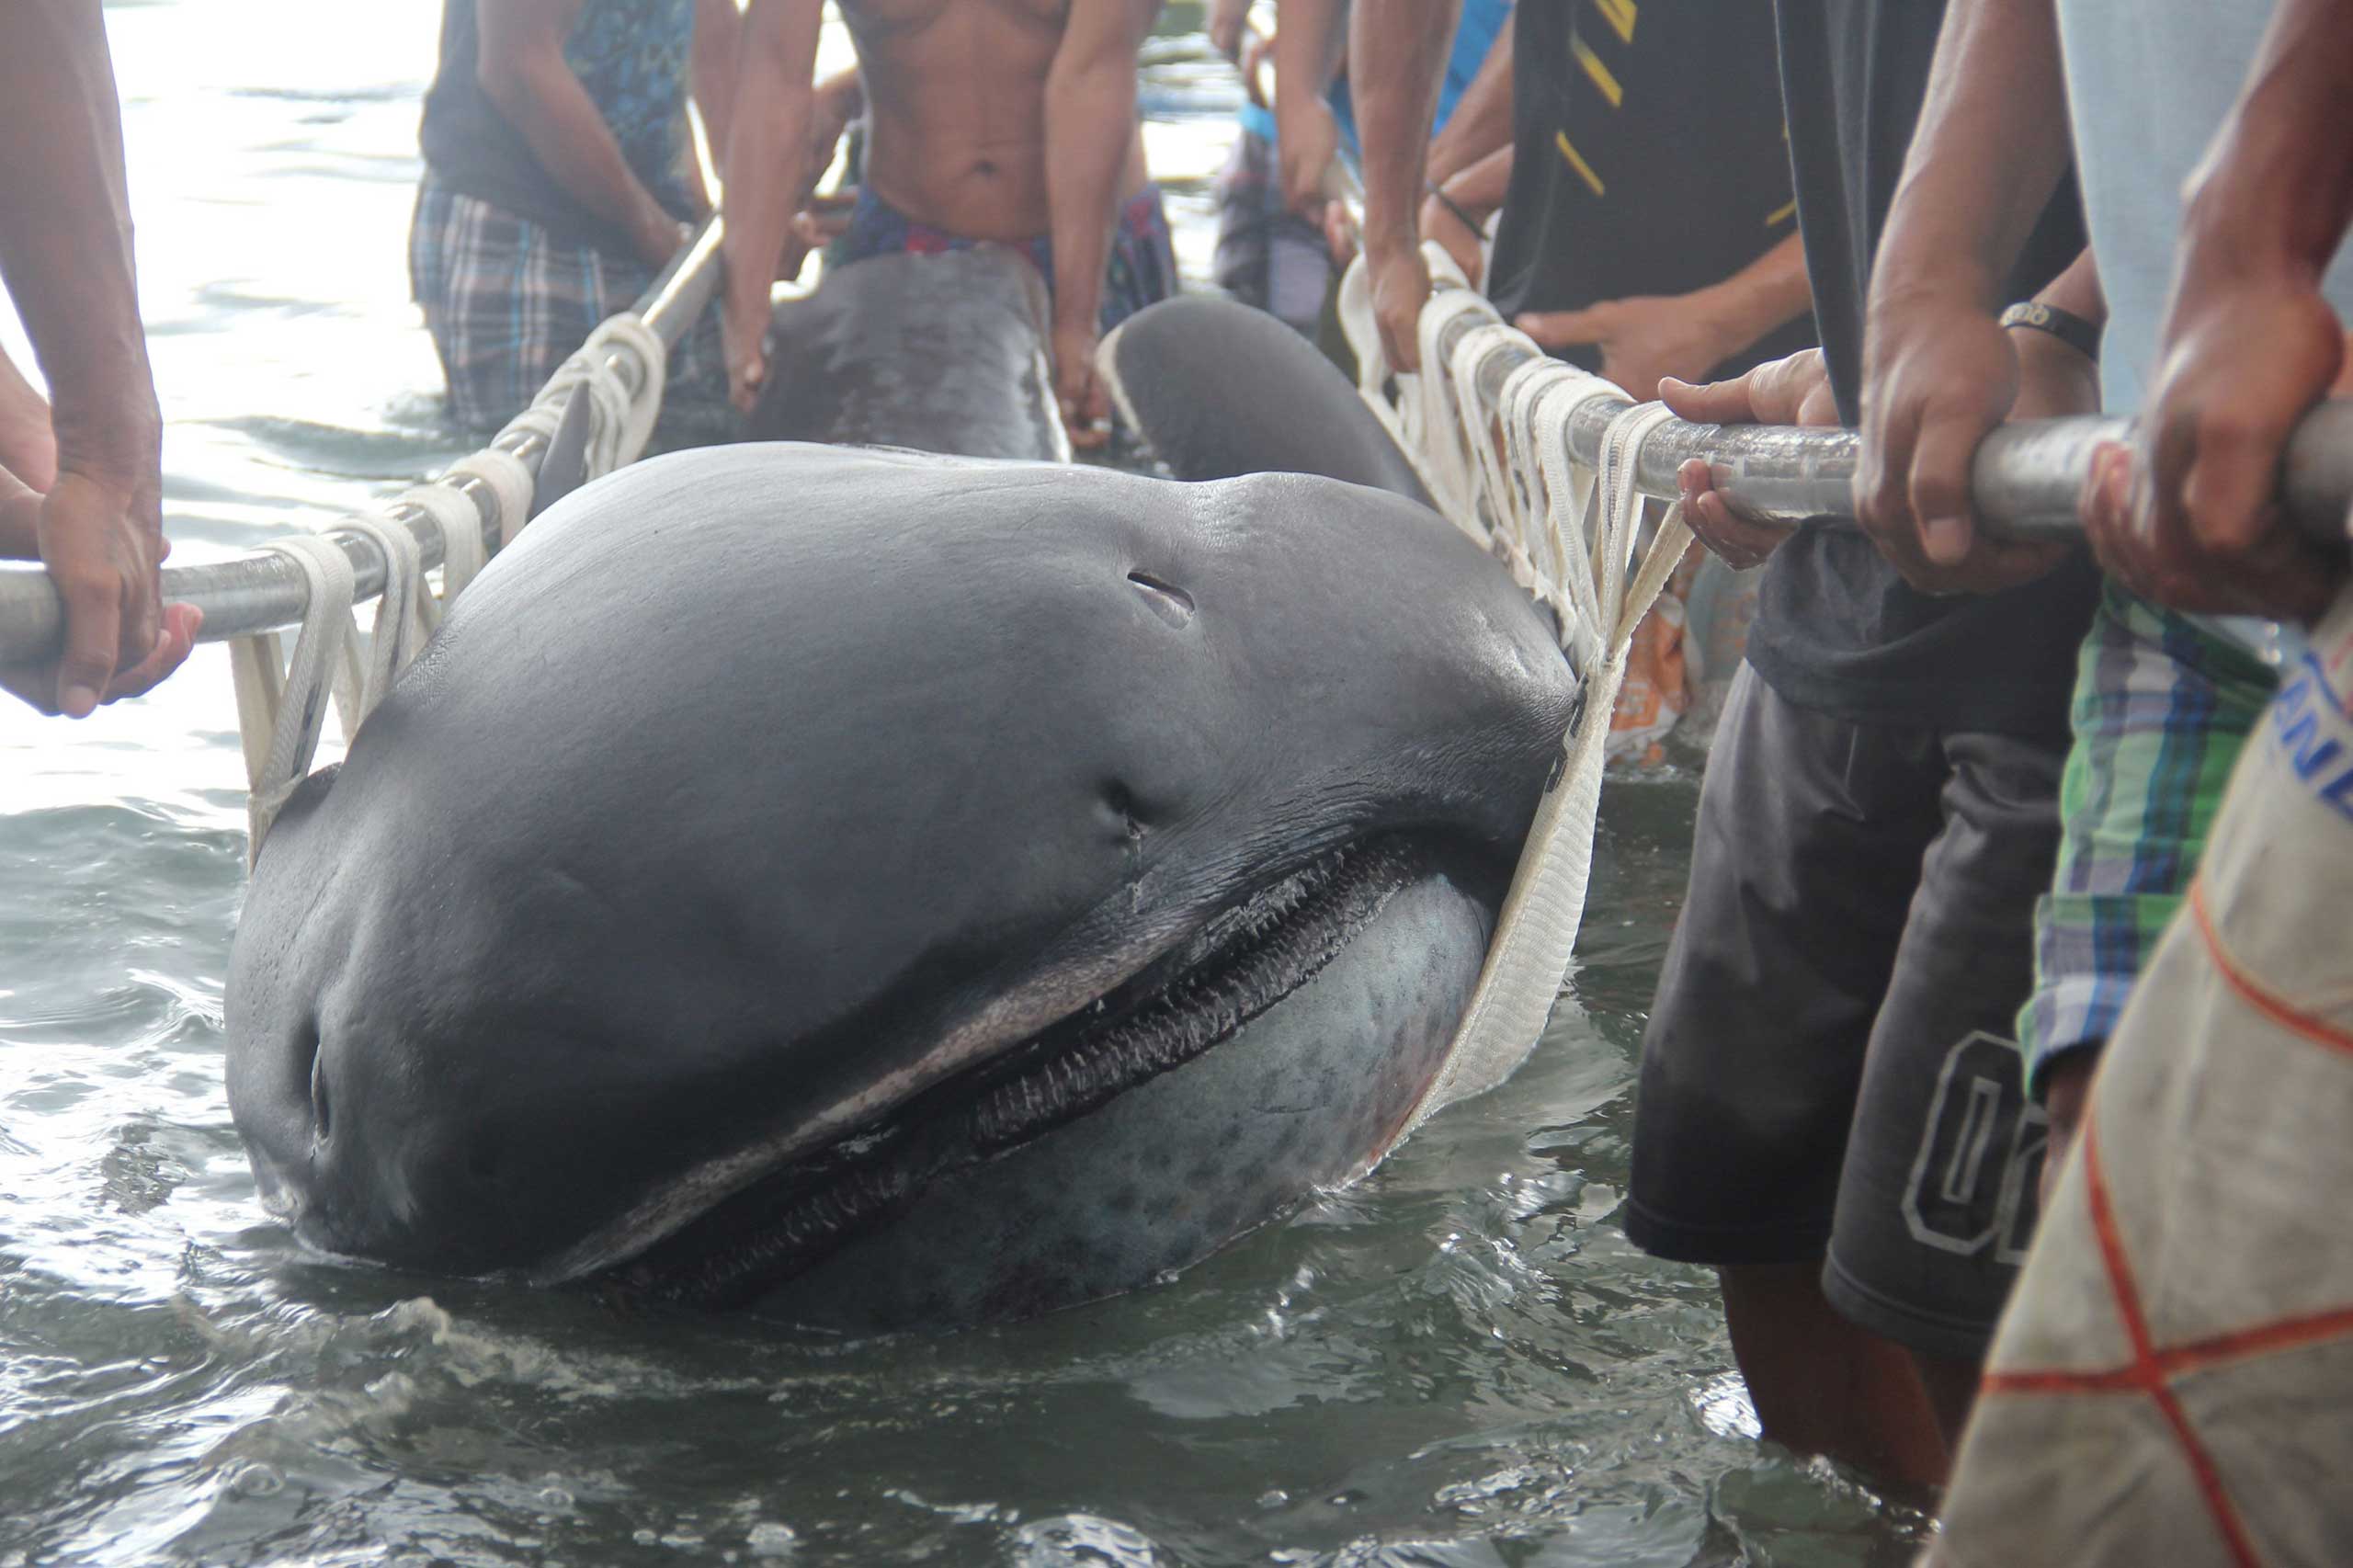 Fishermen use a stretcher with steels bars to carry a rare 15-foot megamouth shark, which was trapped in a fishermen's net in Burias Pass in Albay and Masbate provinces, central Philippines, Jan. 28, 2015. (Rhaydz Barcia—Reuters)